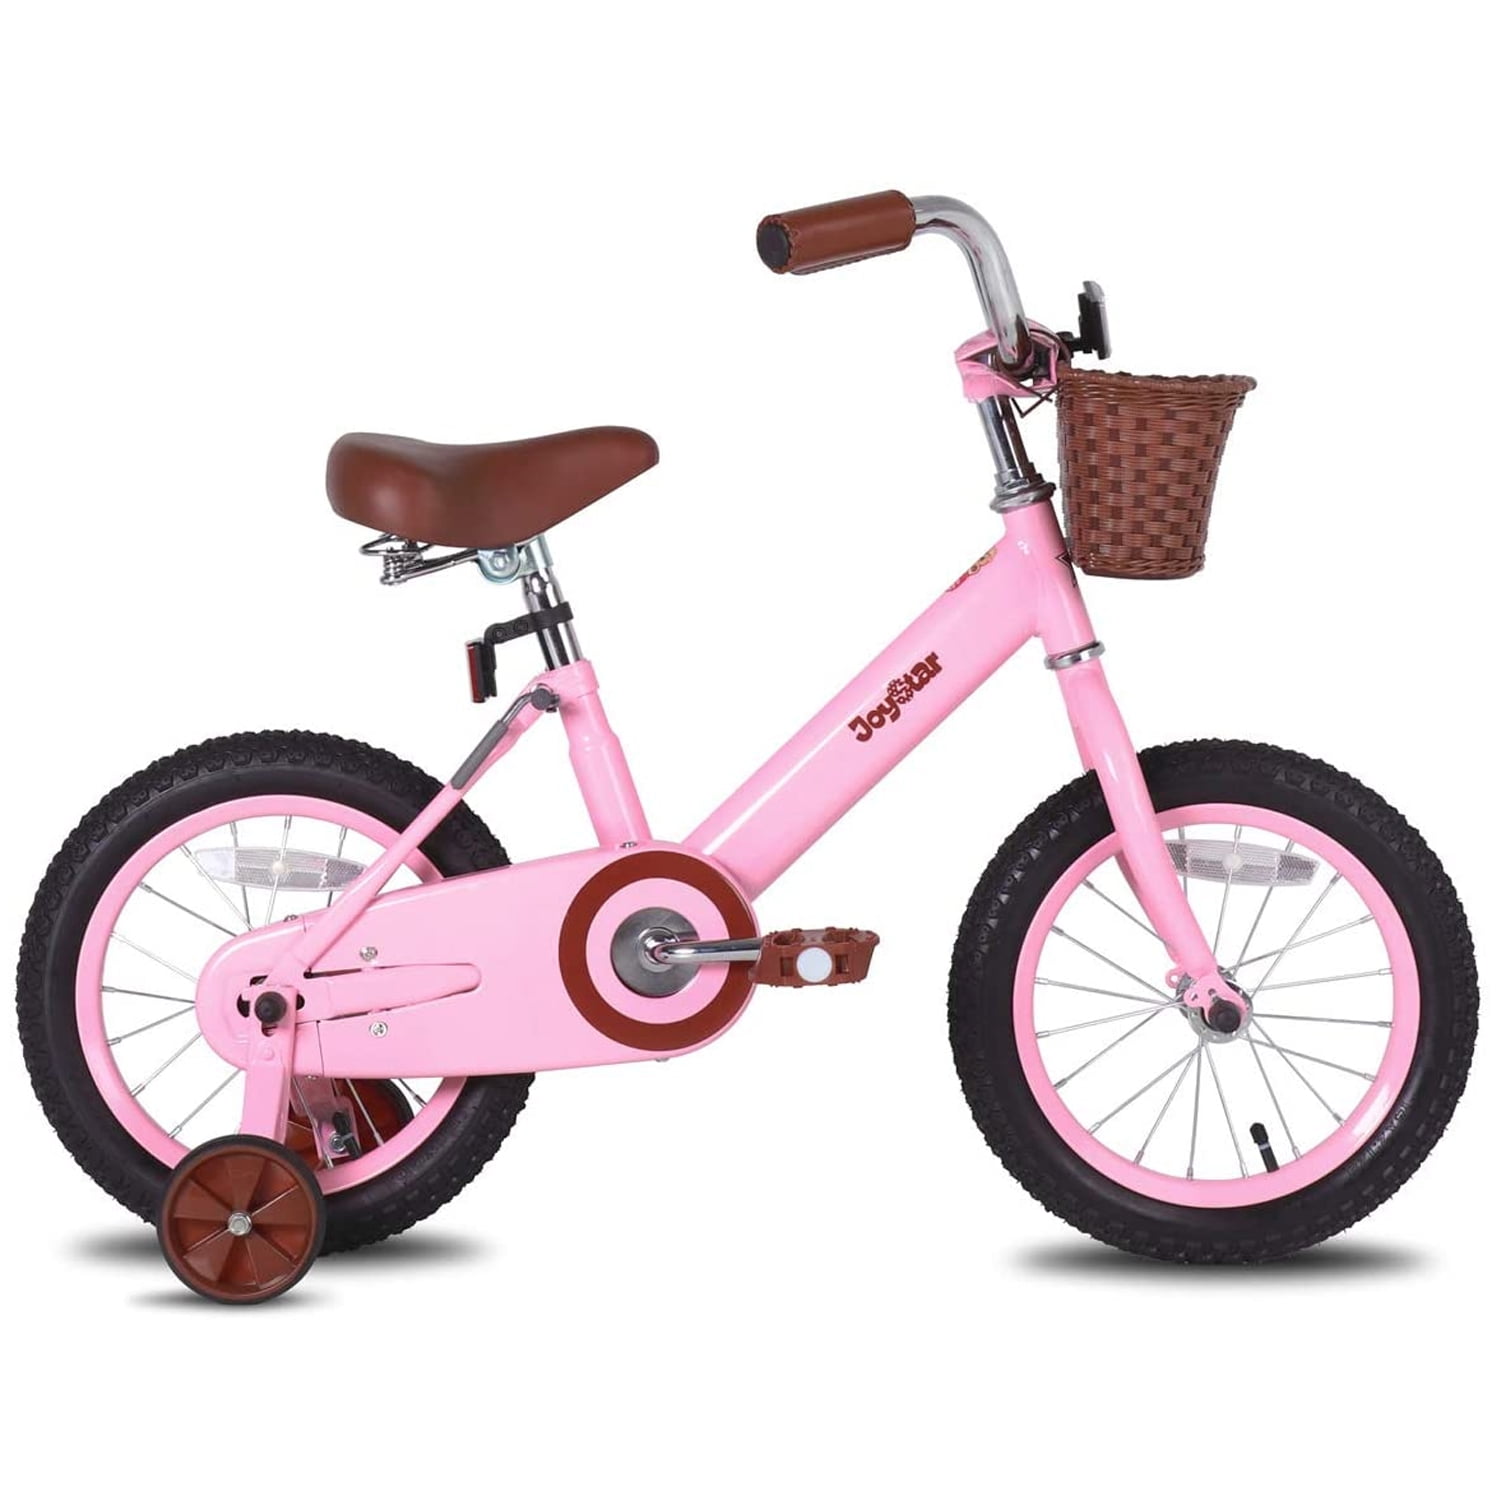 16 Kids Bike Bicycle Children Boys & Girls with Training Wheels and Basket Pink 